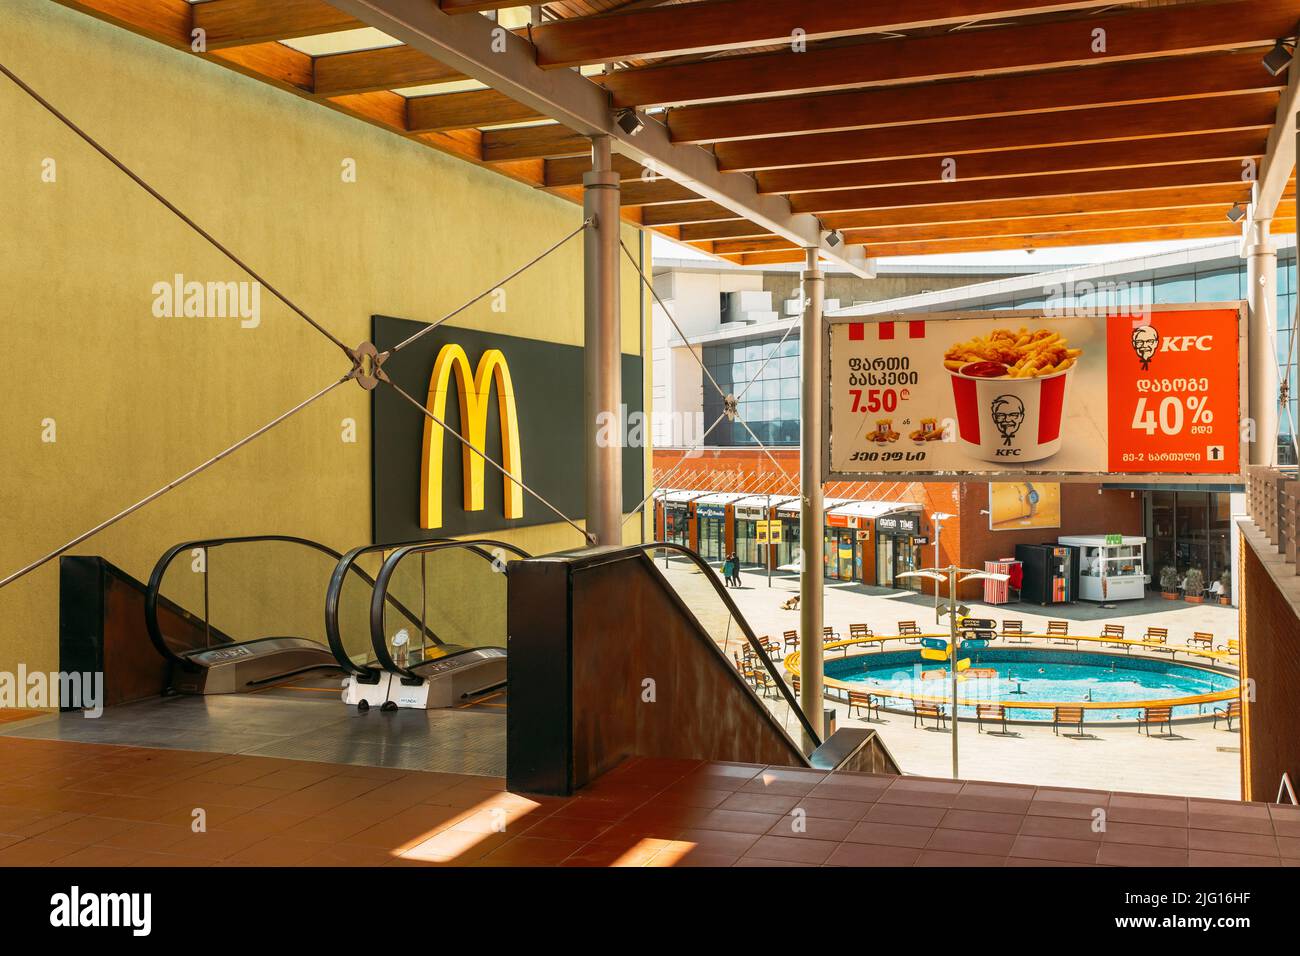 Tbilisi, Georgia - March 28, 2022: Fast Food Restaurant Banners: Mcdonald's And Kfc In Shopping Mall East Point Stock Photo